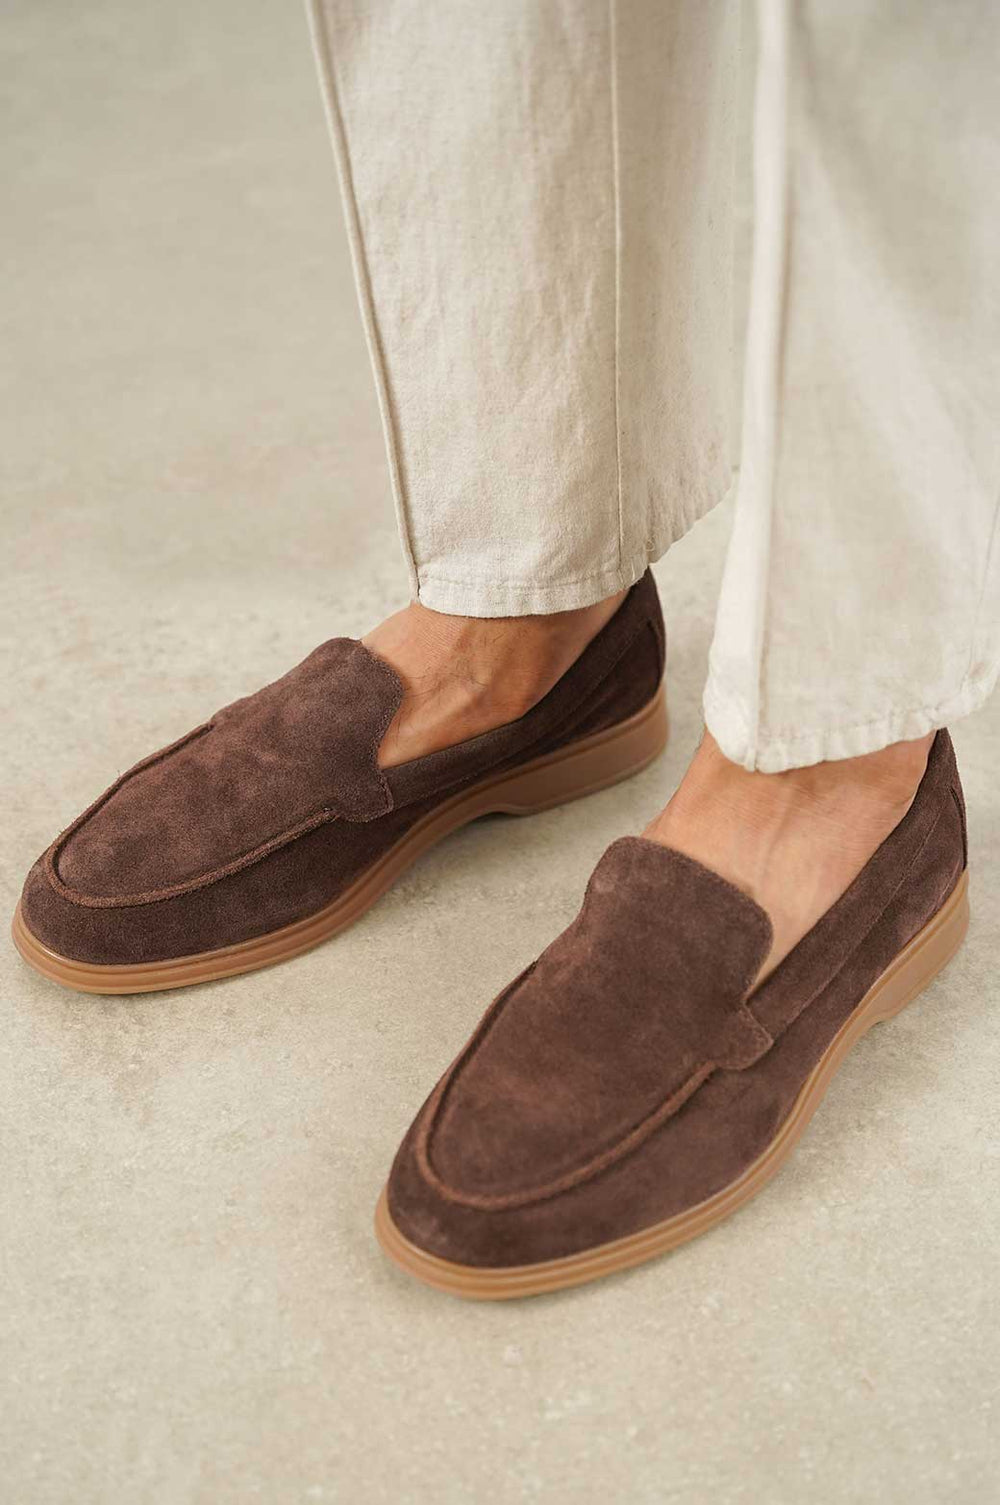 COFFEE SLIP-ON LOAFERS